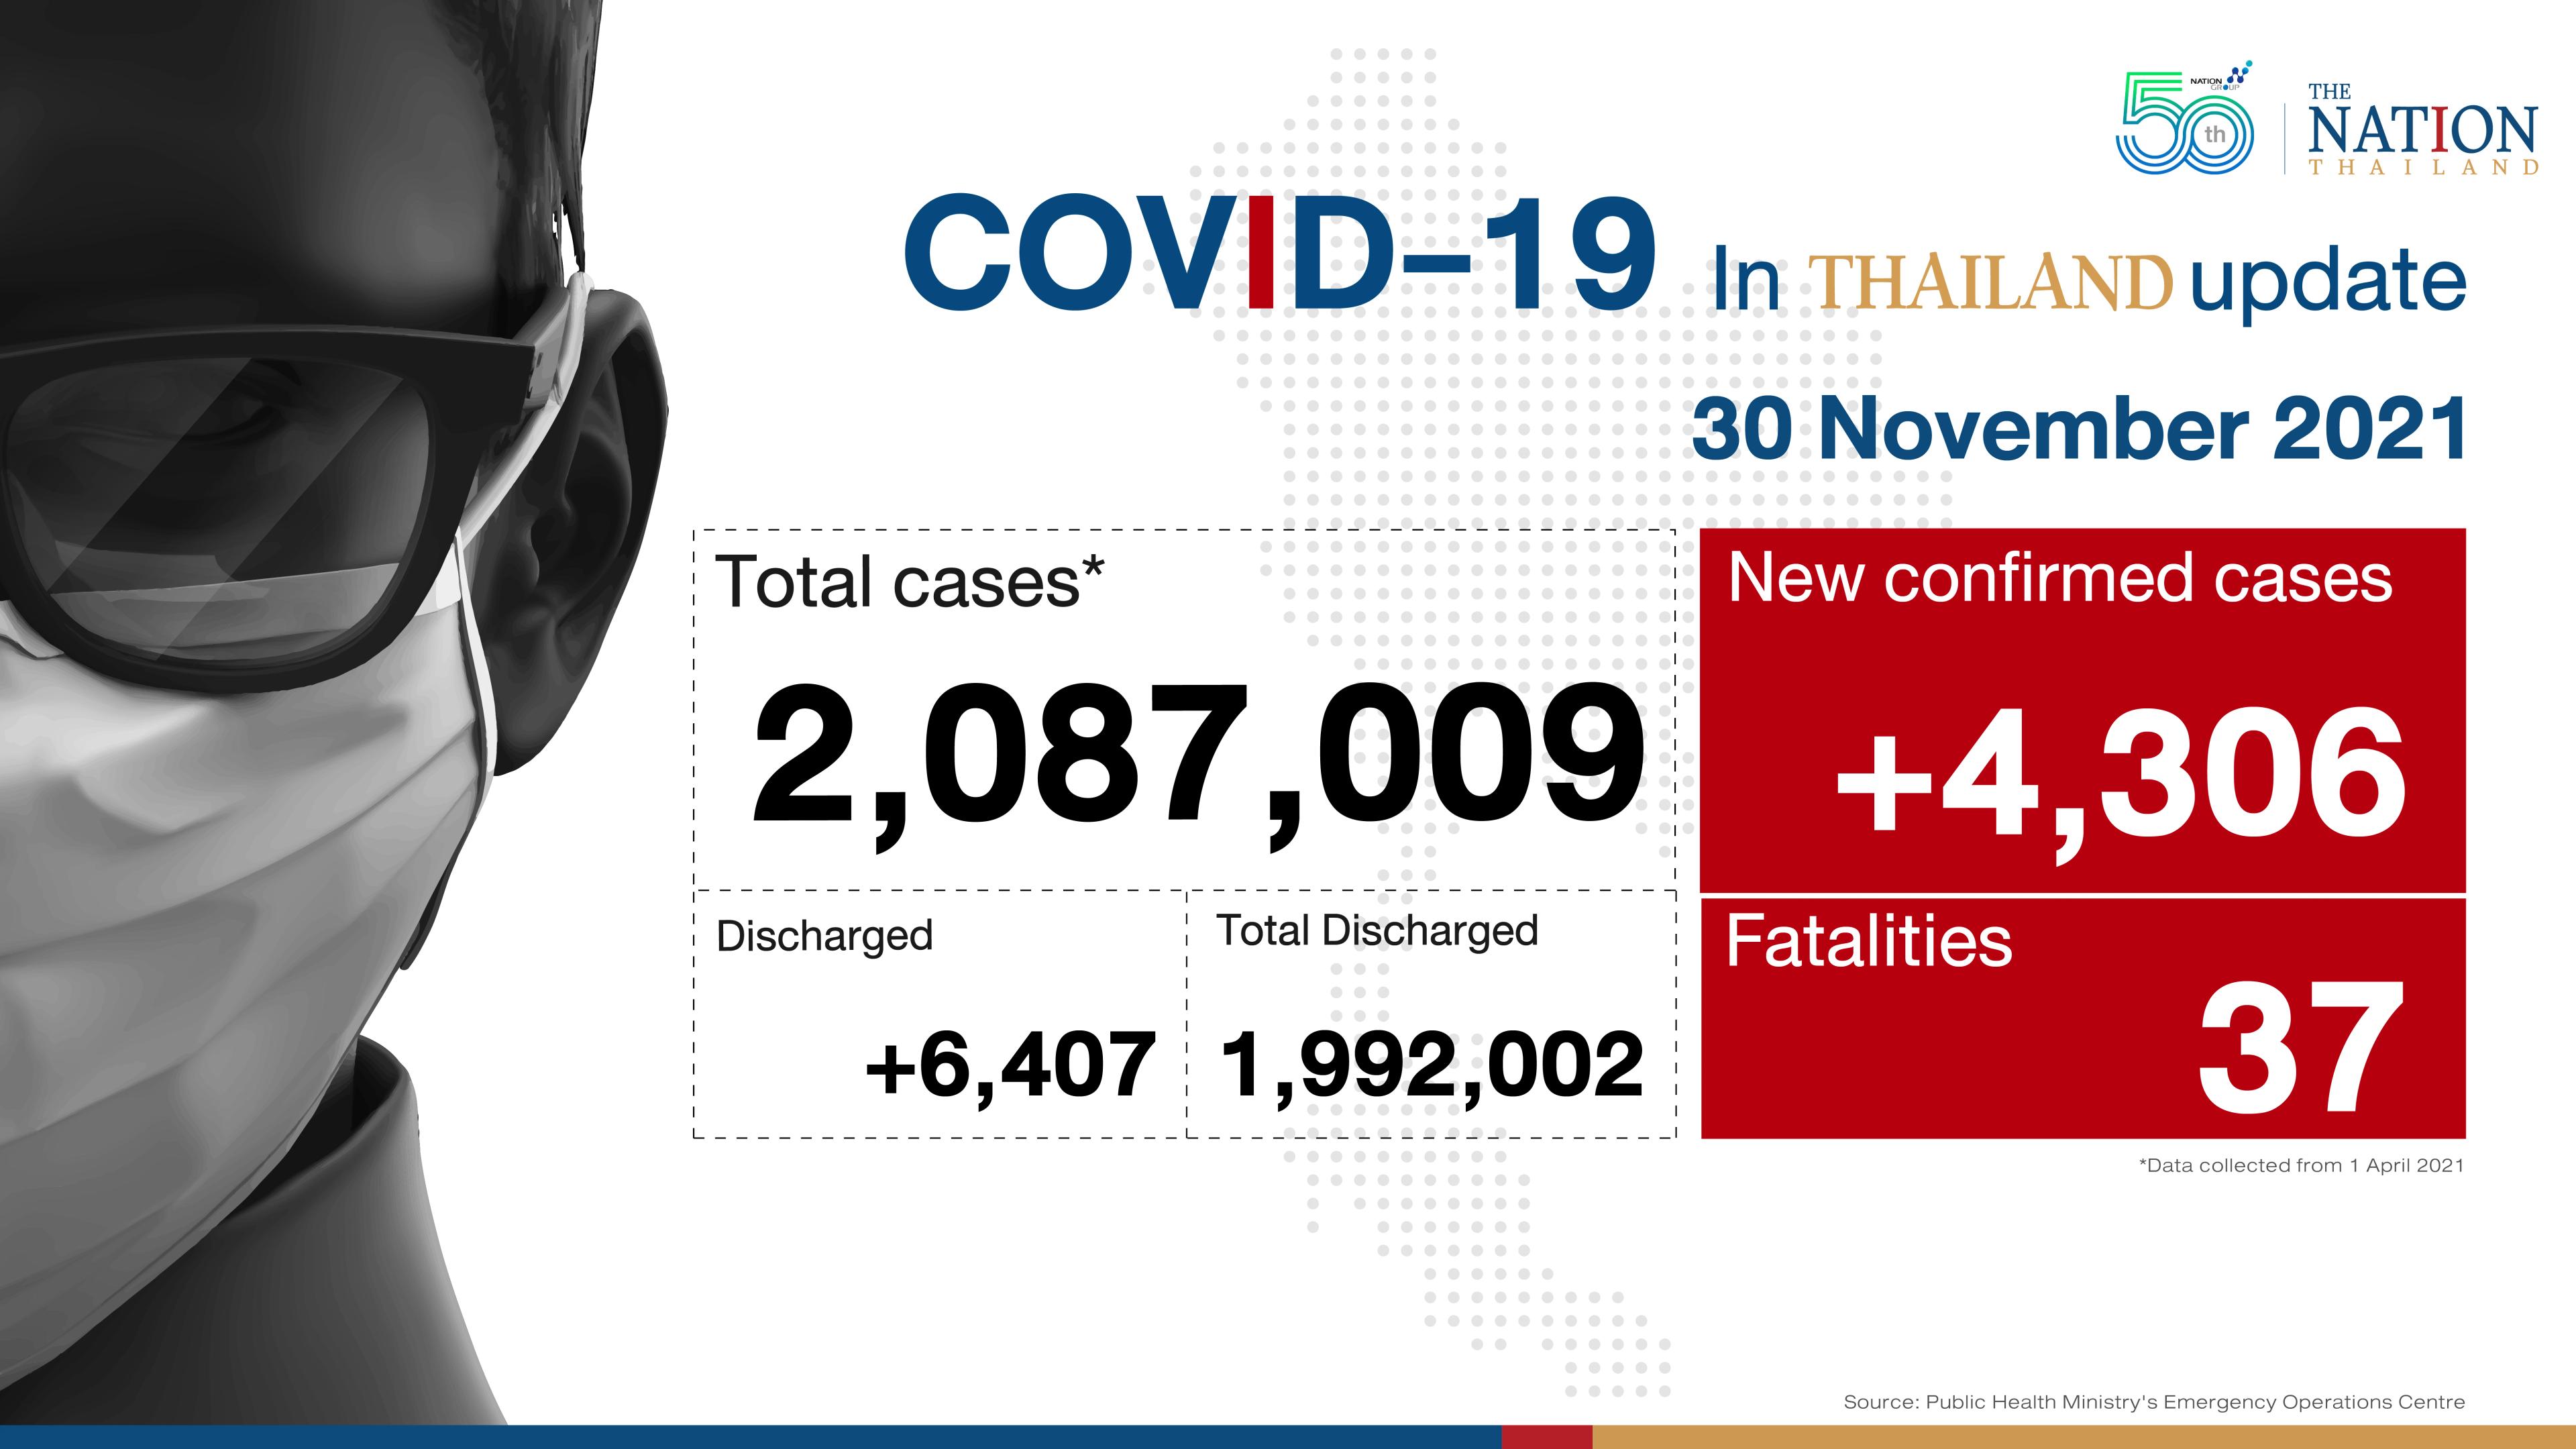 Thailand recorded 4,306 Covid-19 cases and 37 deaths on Tuesday.